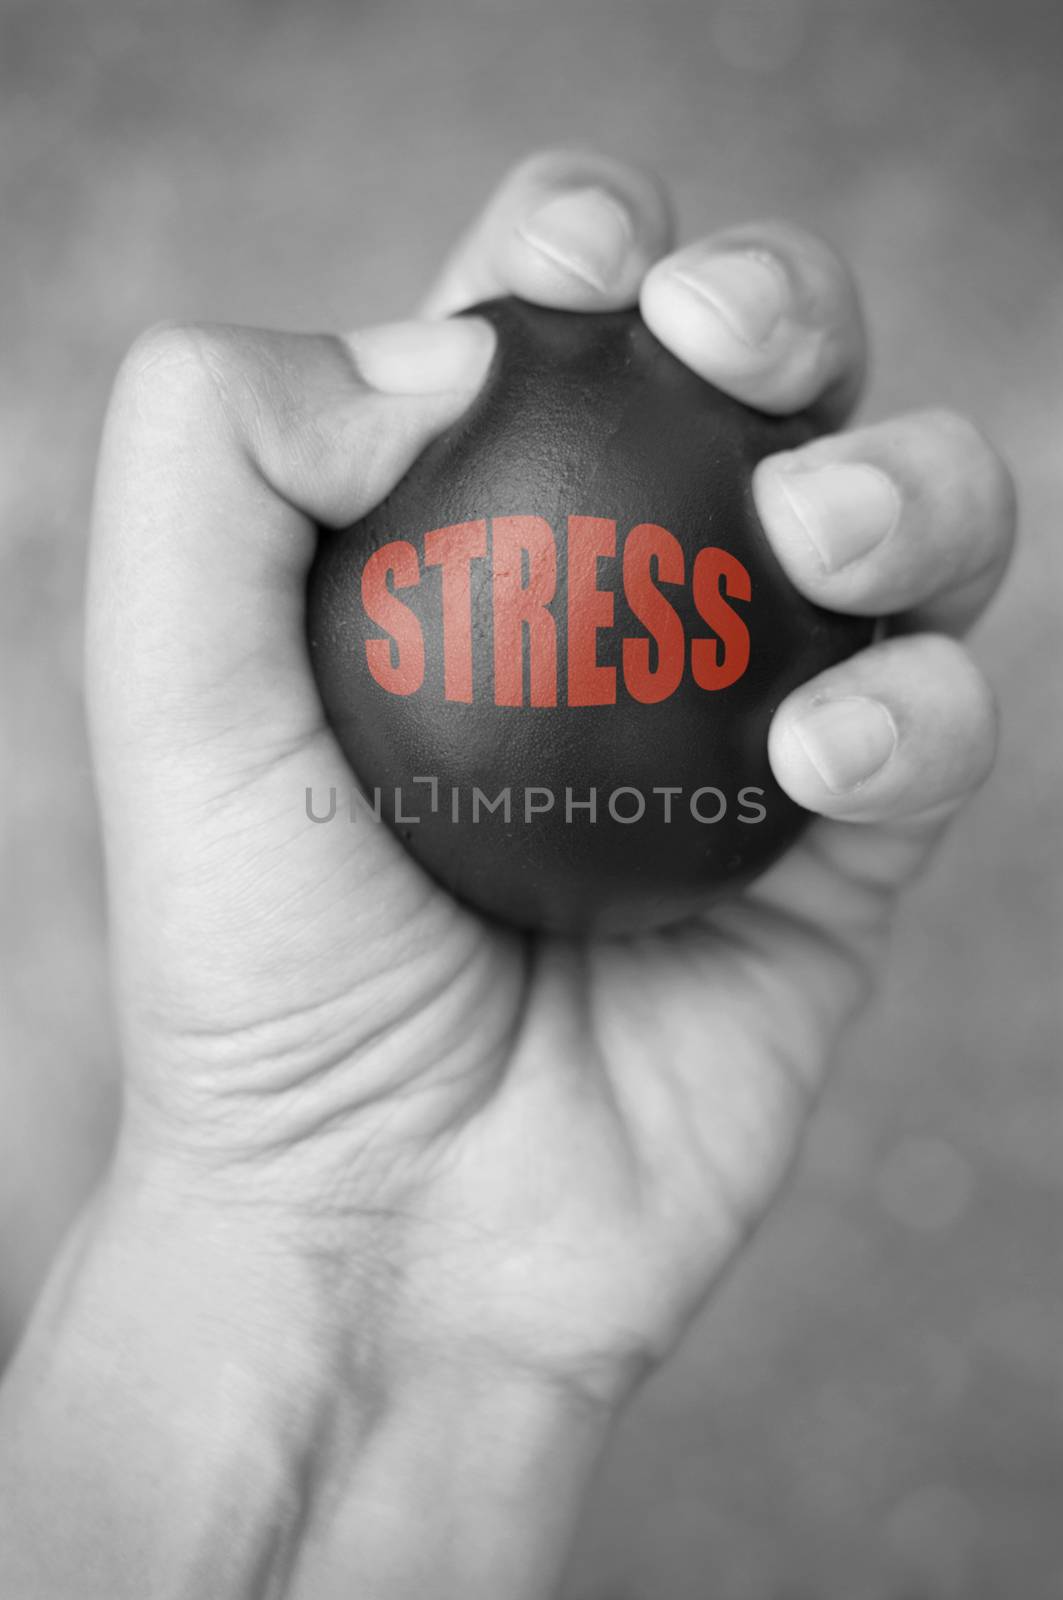 Hand squeezing a stress ball 